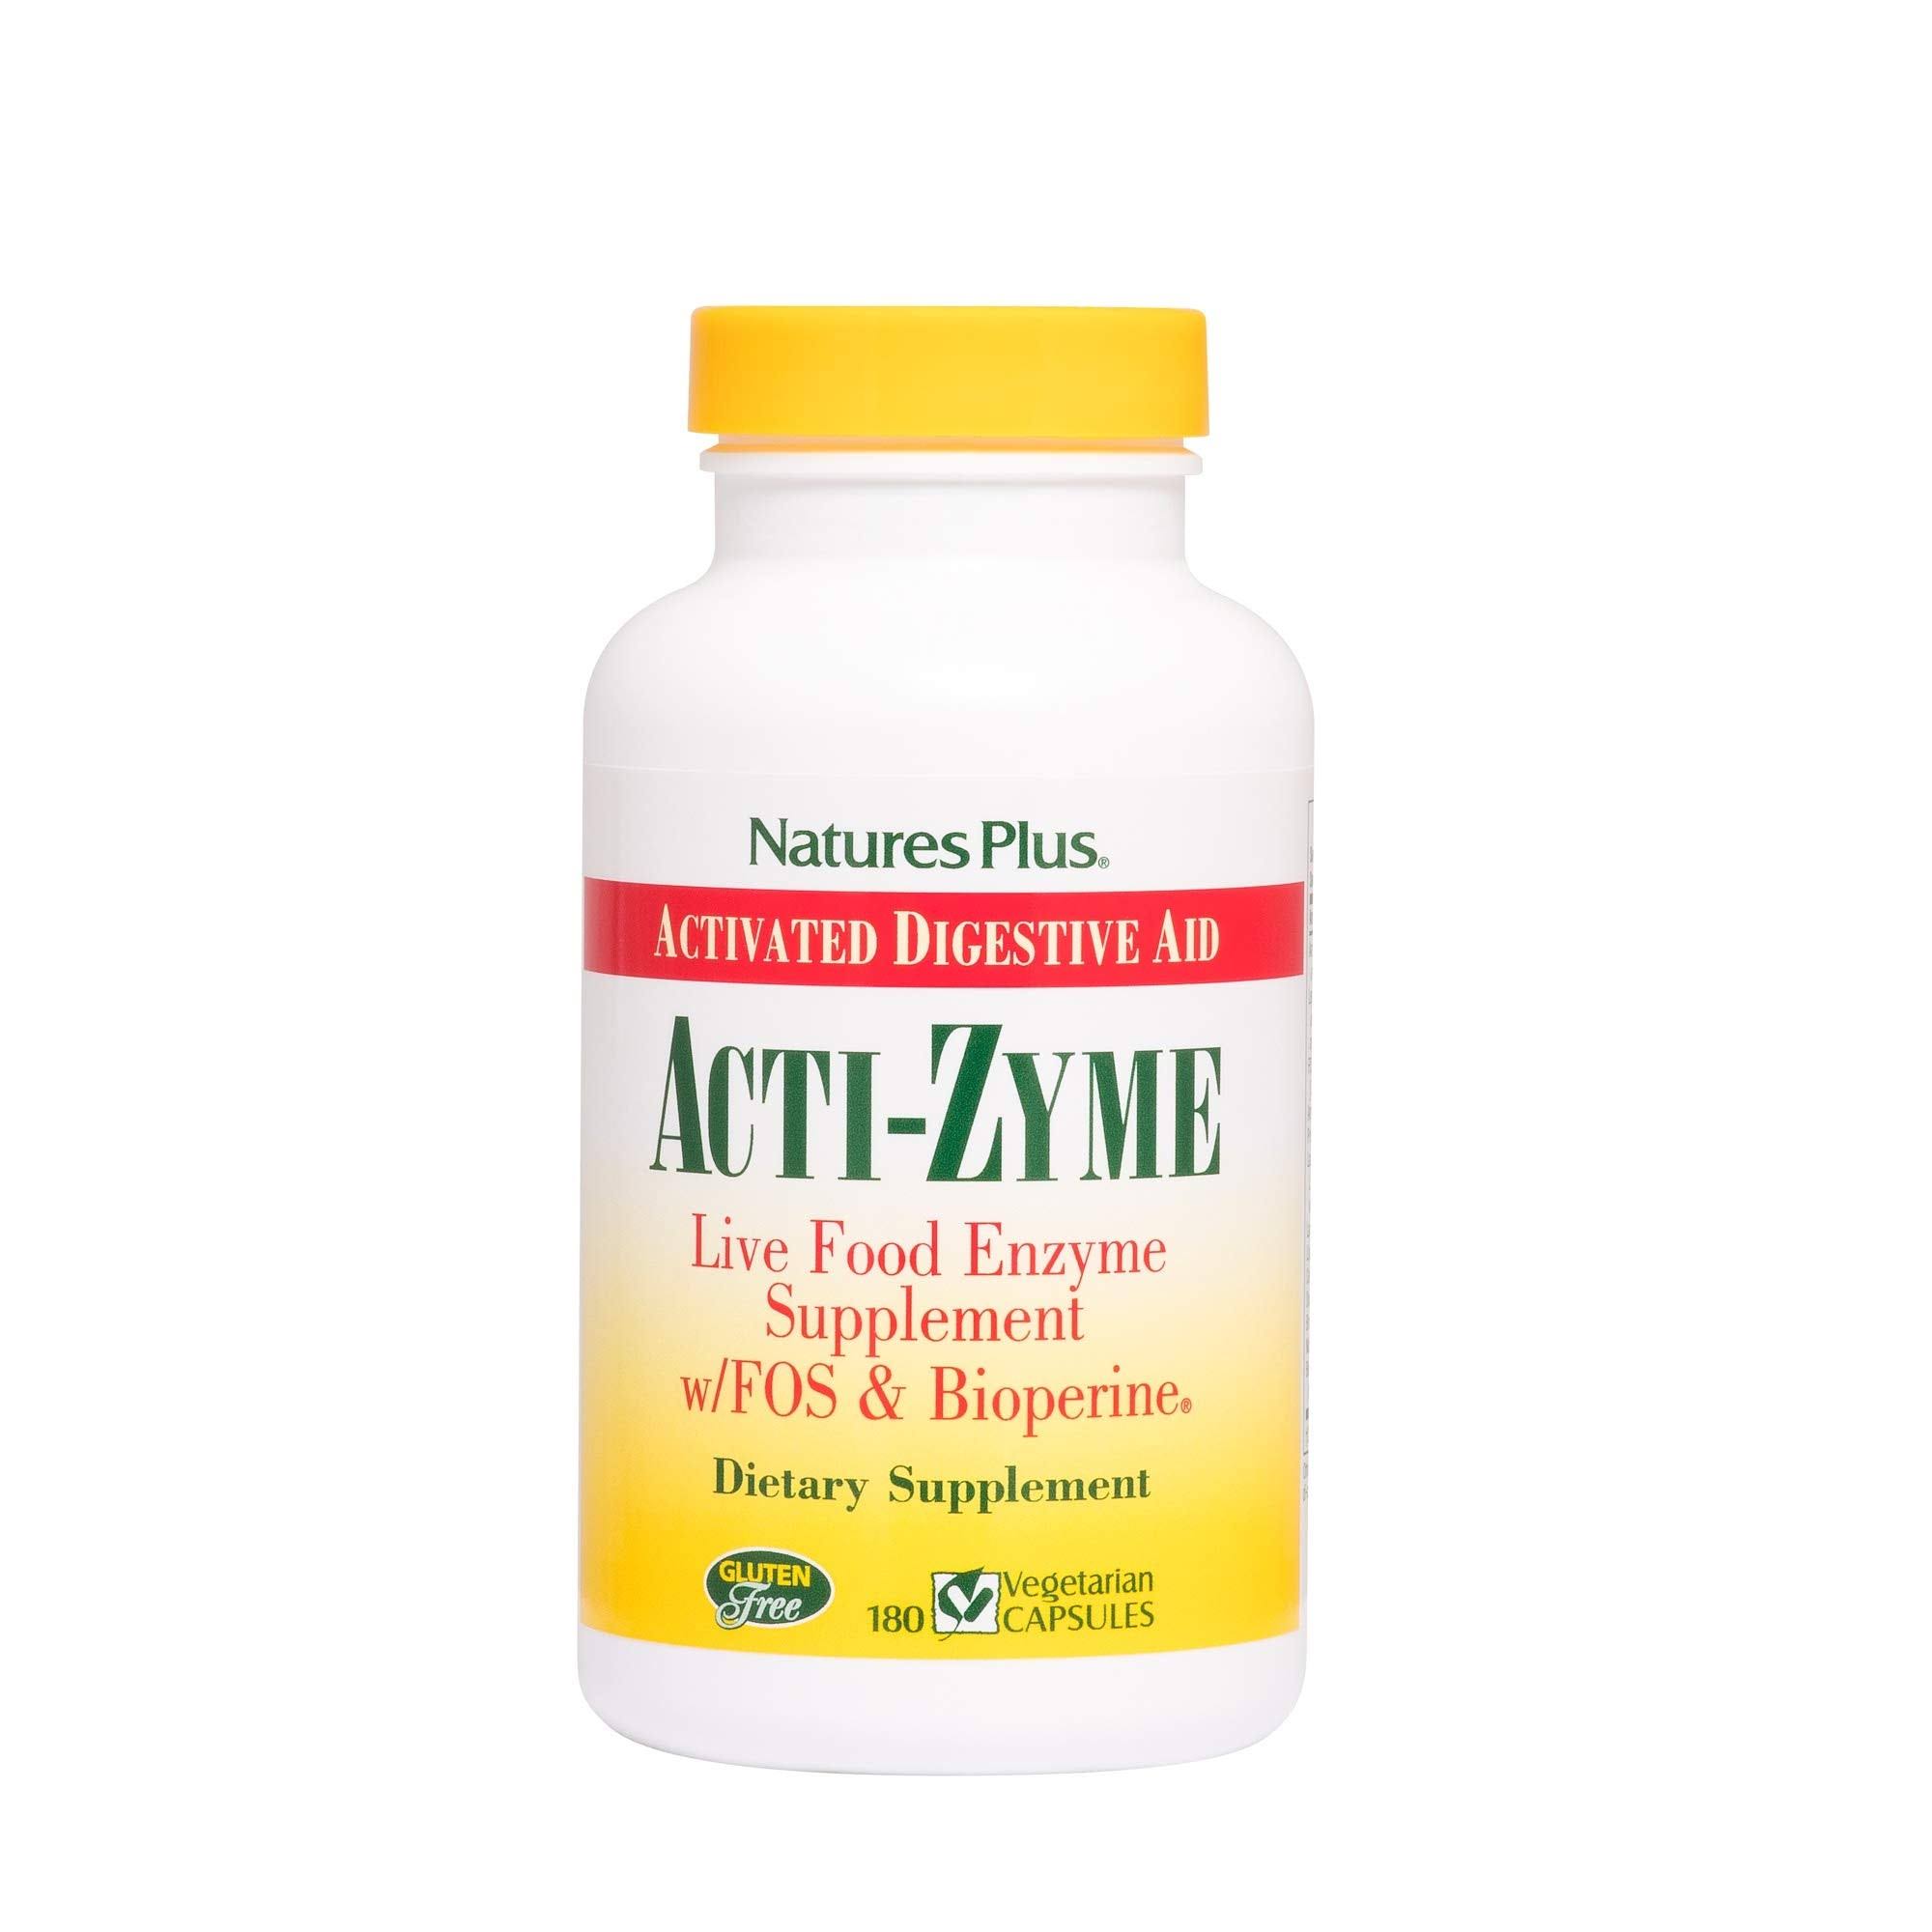 Nature's Plus Acti-Zyme Live Food Enzymes Supplement - 180 Vegetarian Capsules